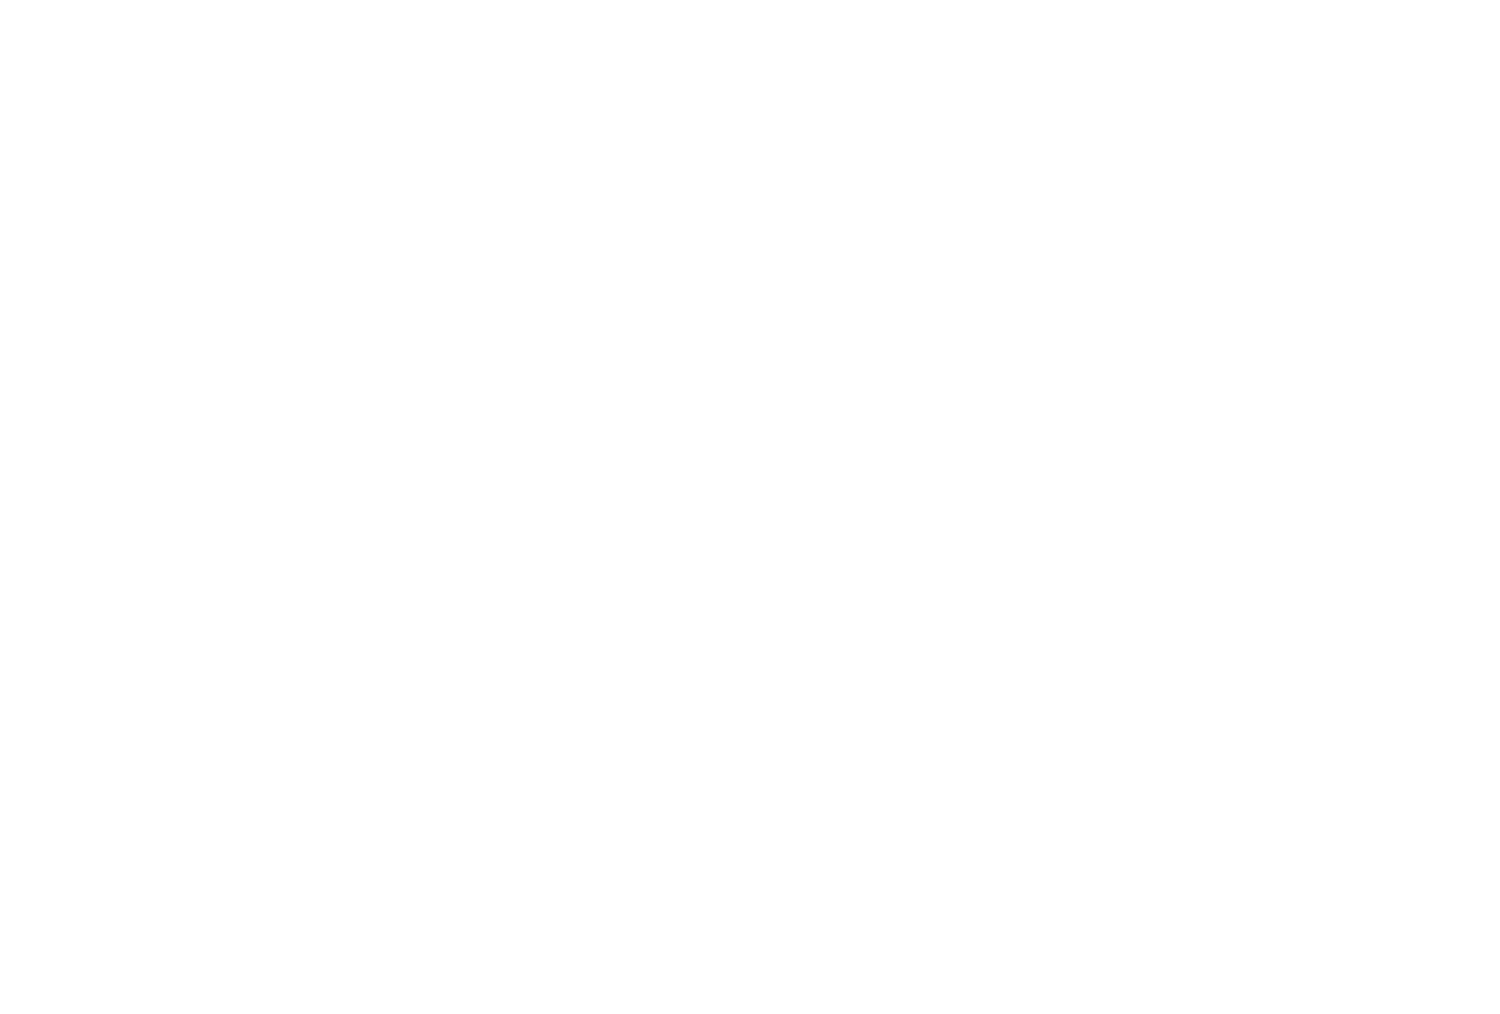 Natural Instincts Taxidermy